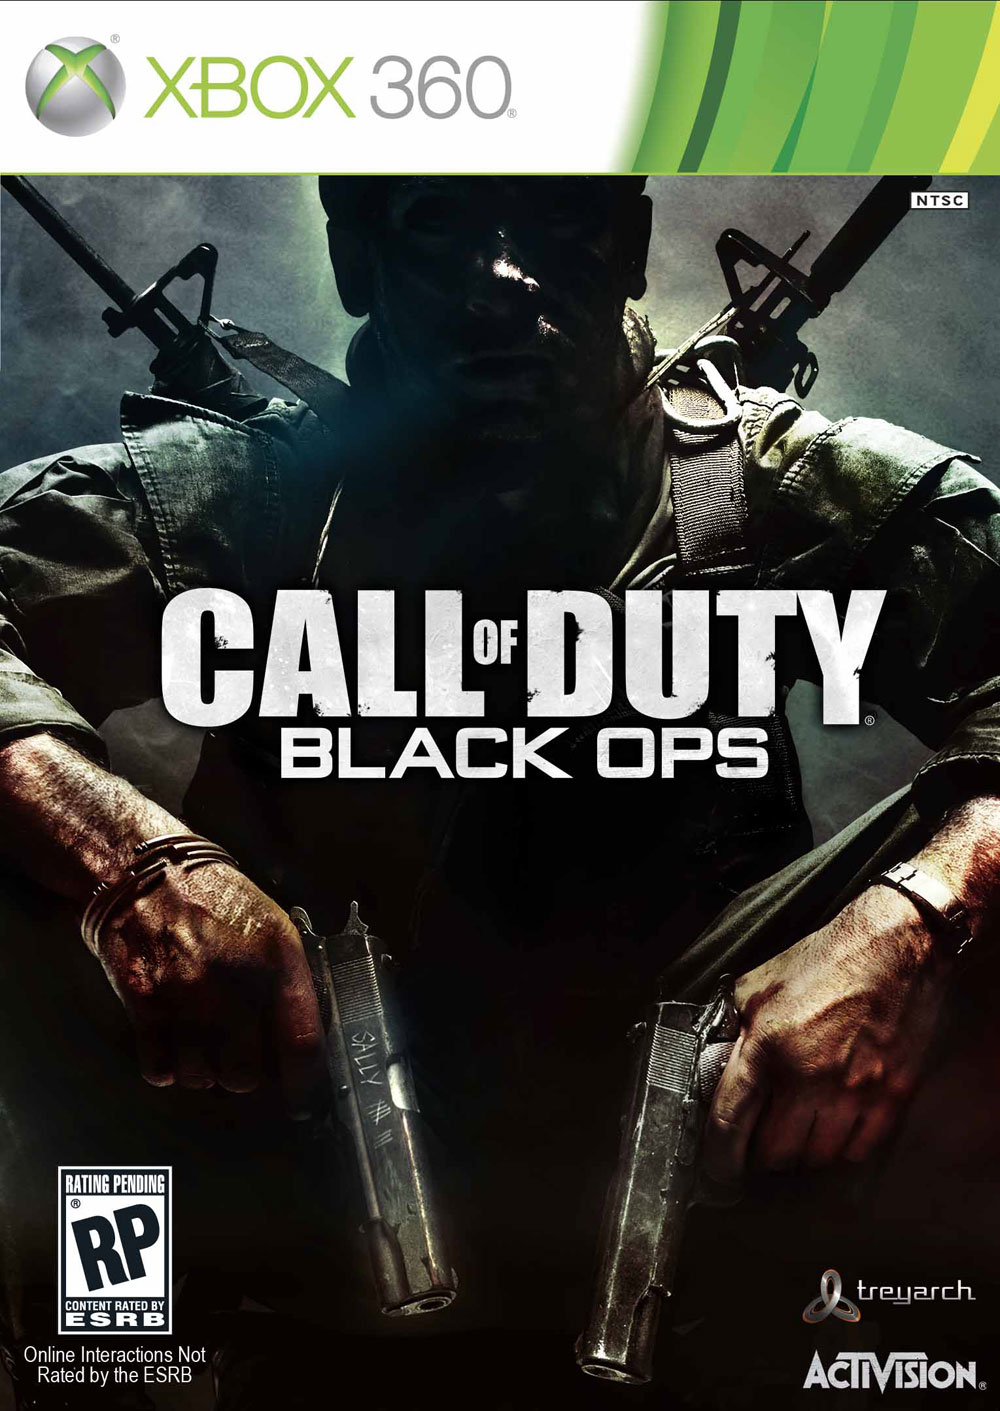 [Review] Call of Duty: Black Ops Codart